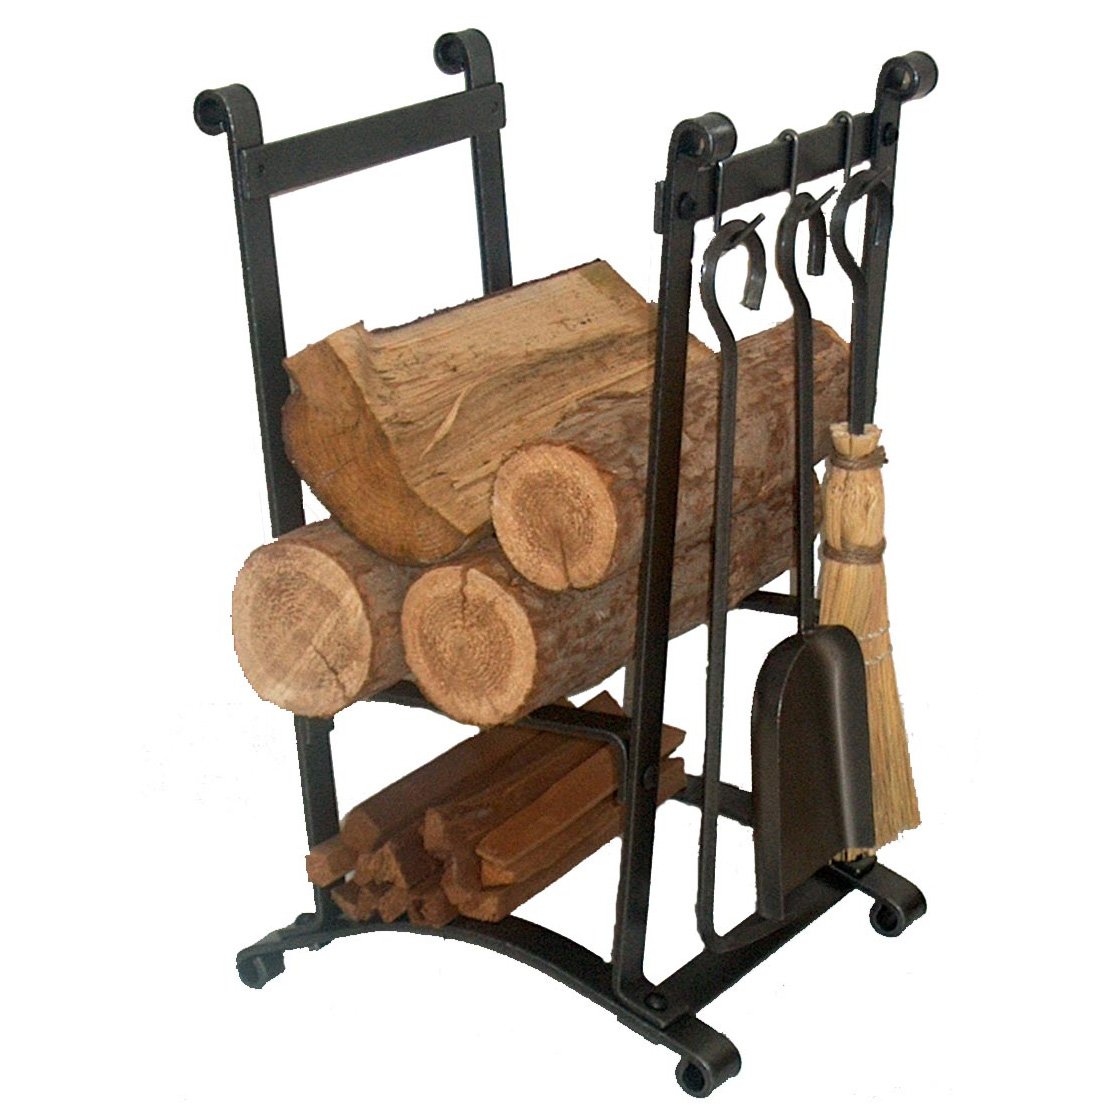 Enclume LR16 HS Compact Curved Fireplace Log Rack w/ 3 Tools HS